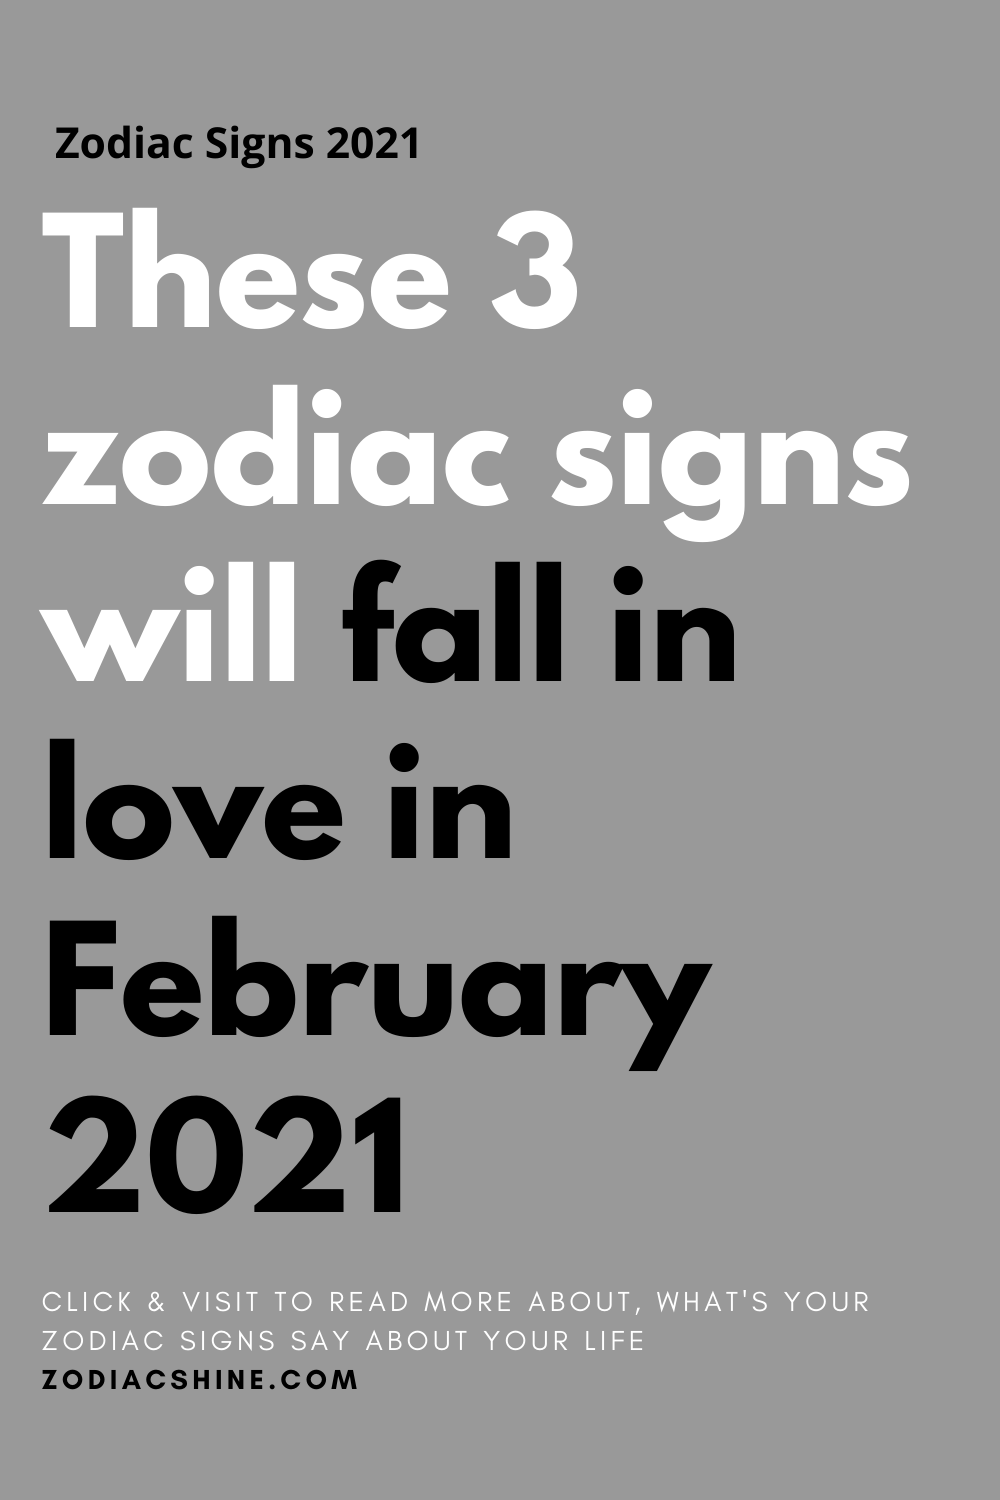 These 3 zodiac signs will fall in love in February 2021